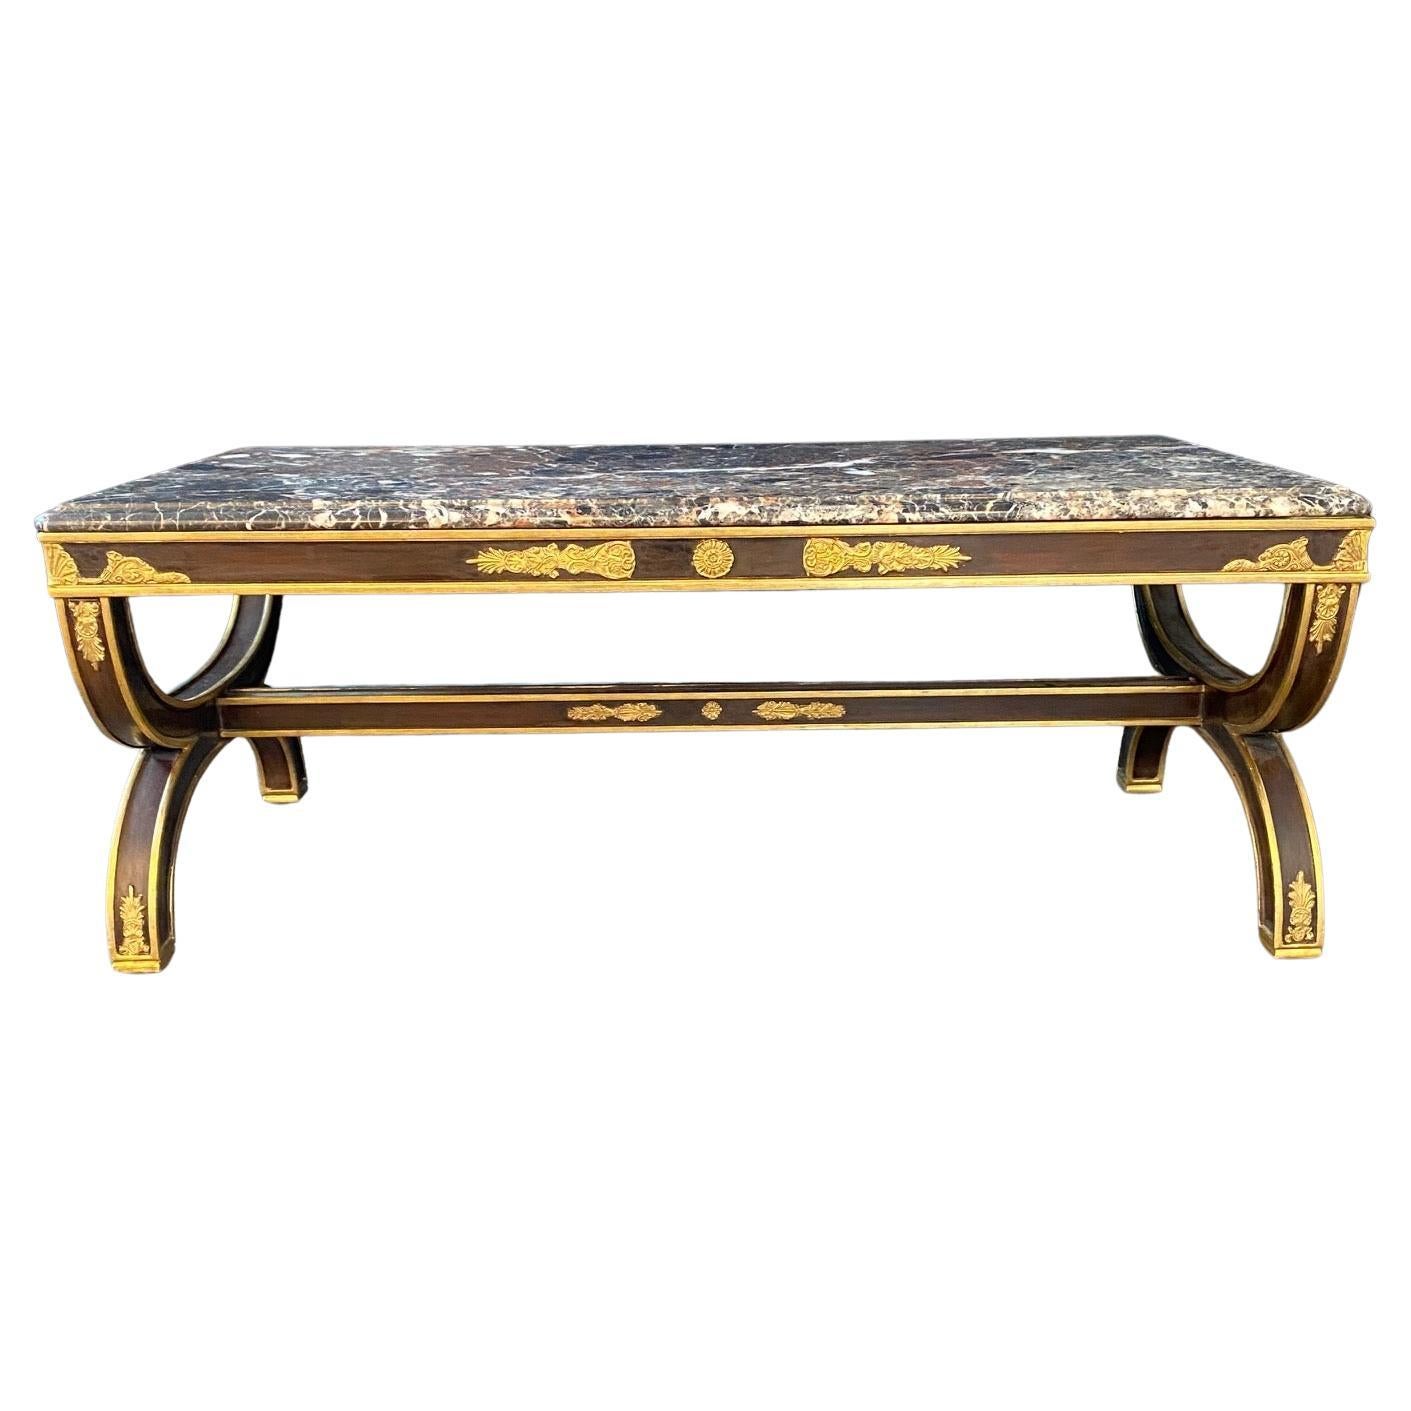 Elegant French Antique Neoclassical Ebony and Gold Gilt Marble Top Coffee Table  For Sale